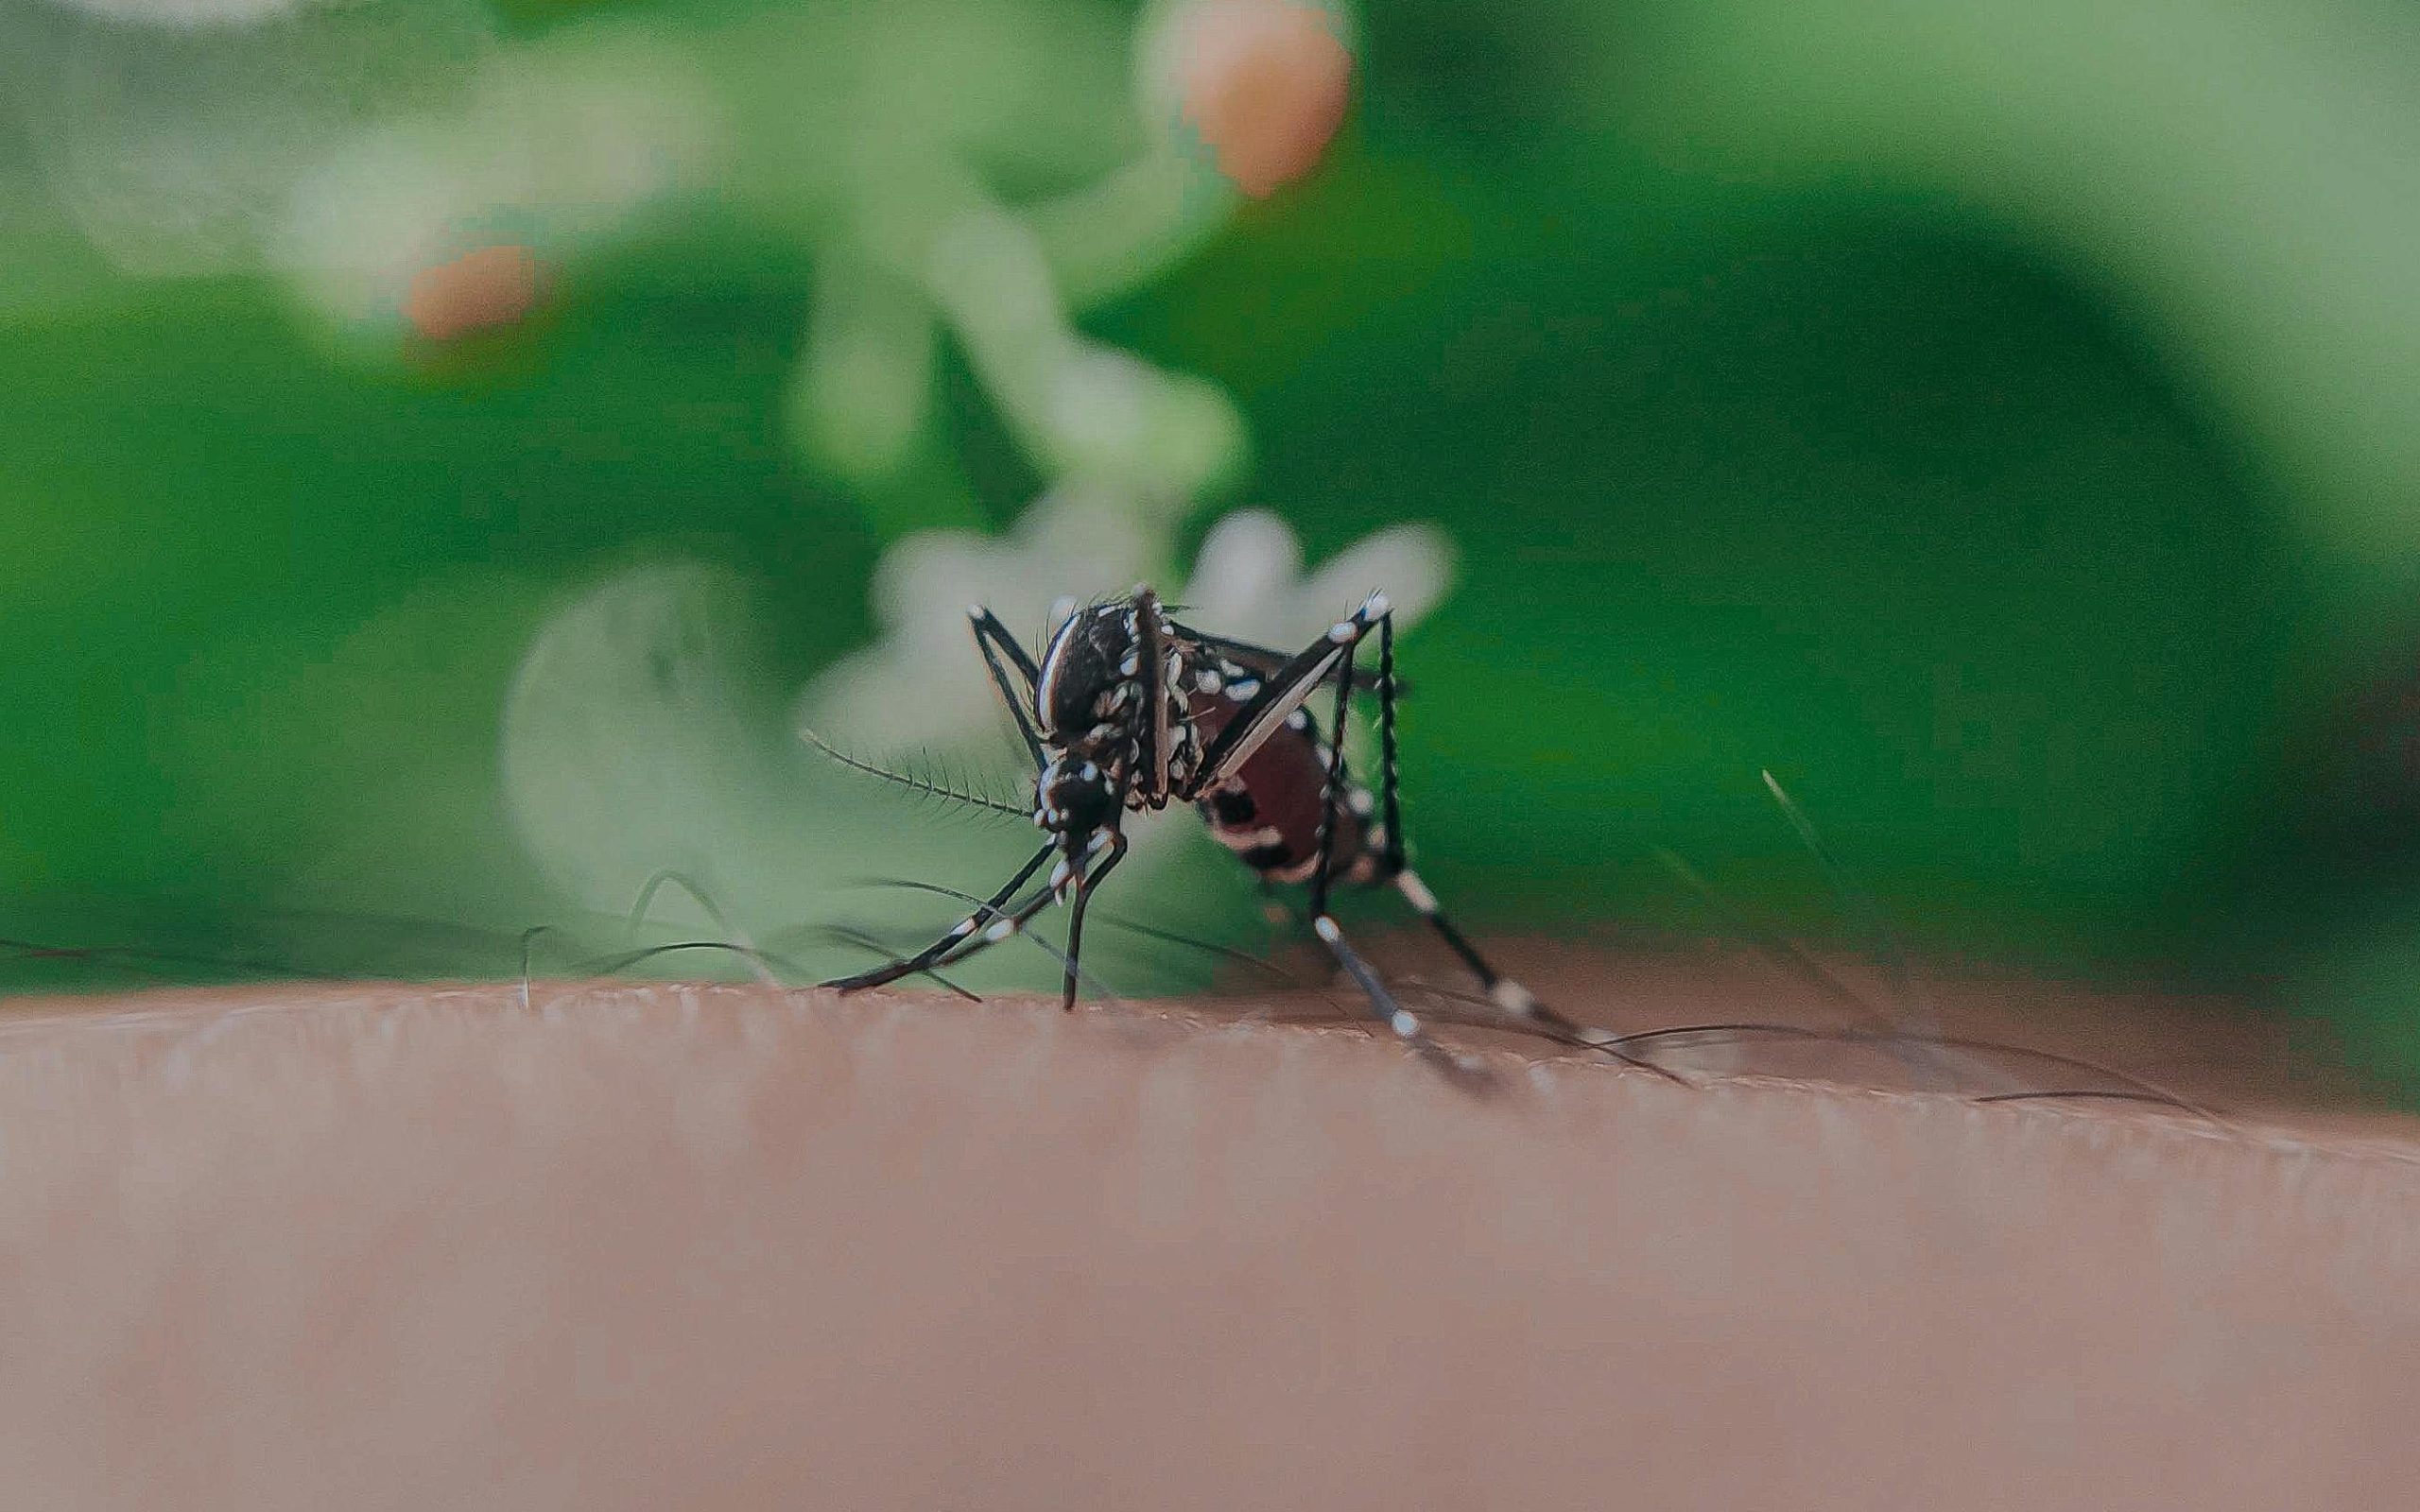 The Aedes aegypti mosquito transmits a viral illness known as Dengue fever.